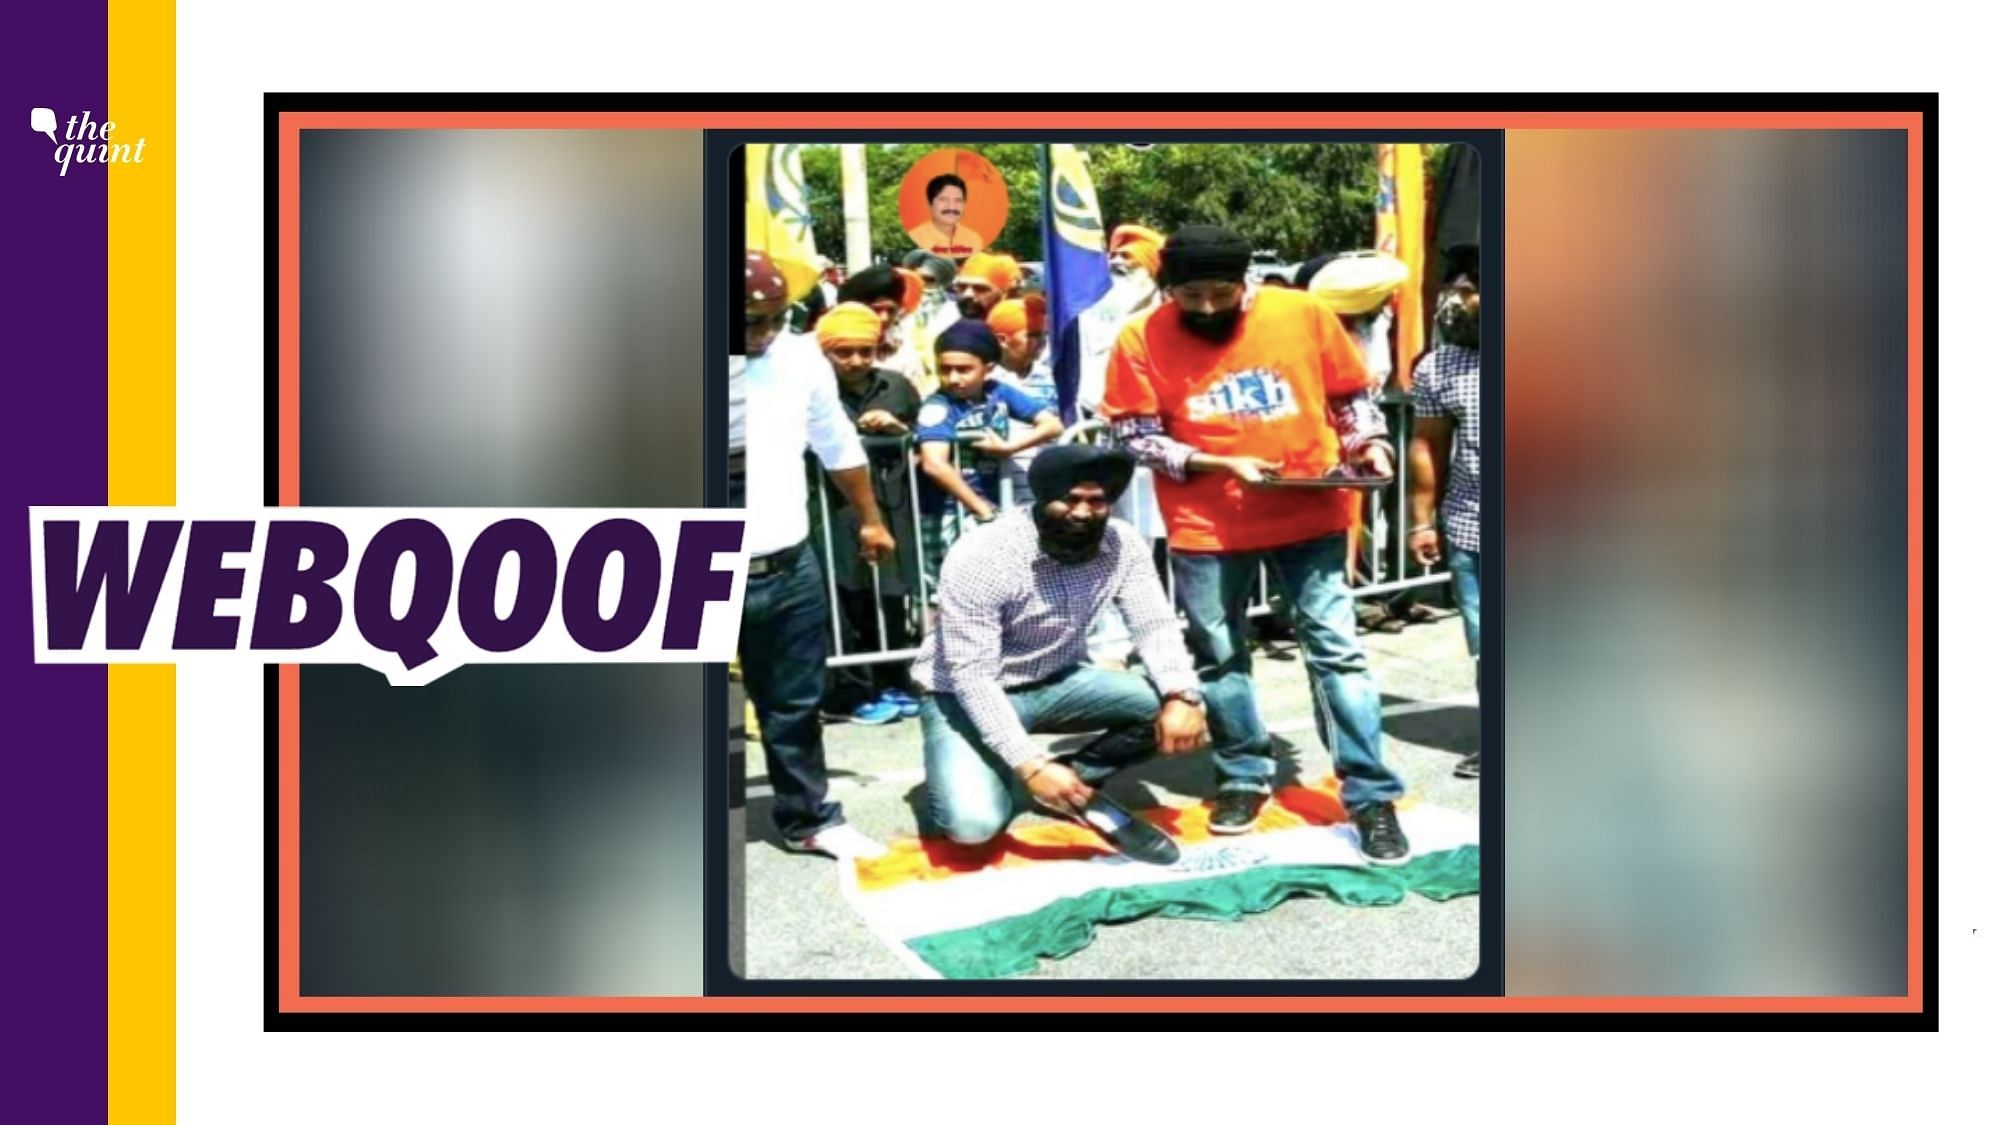 Image of Sikh protesters stepping over India’s national flag is doing the rounds on social media with misleading claims.